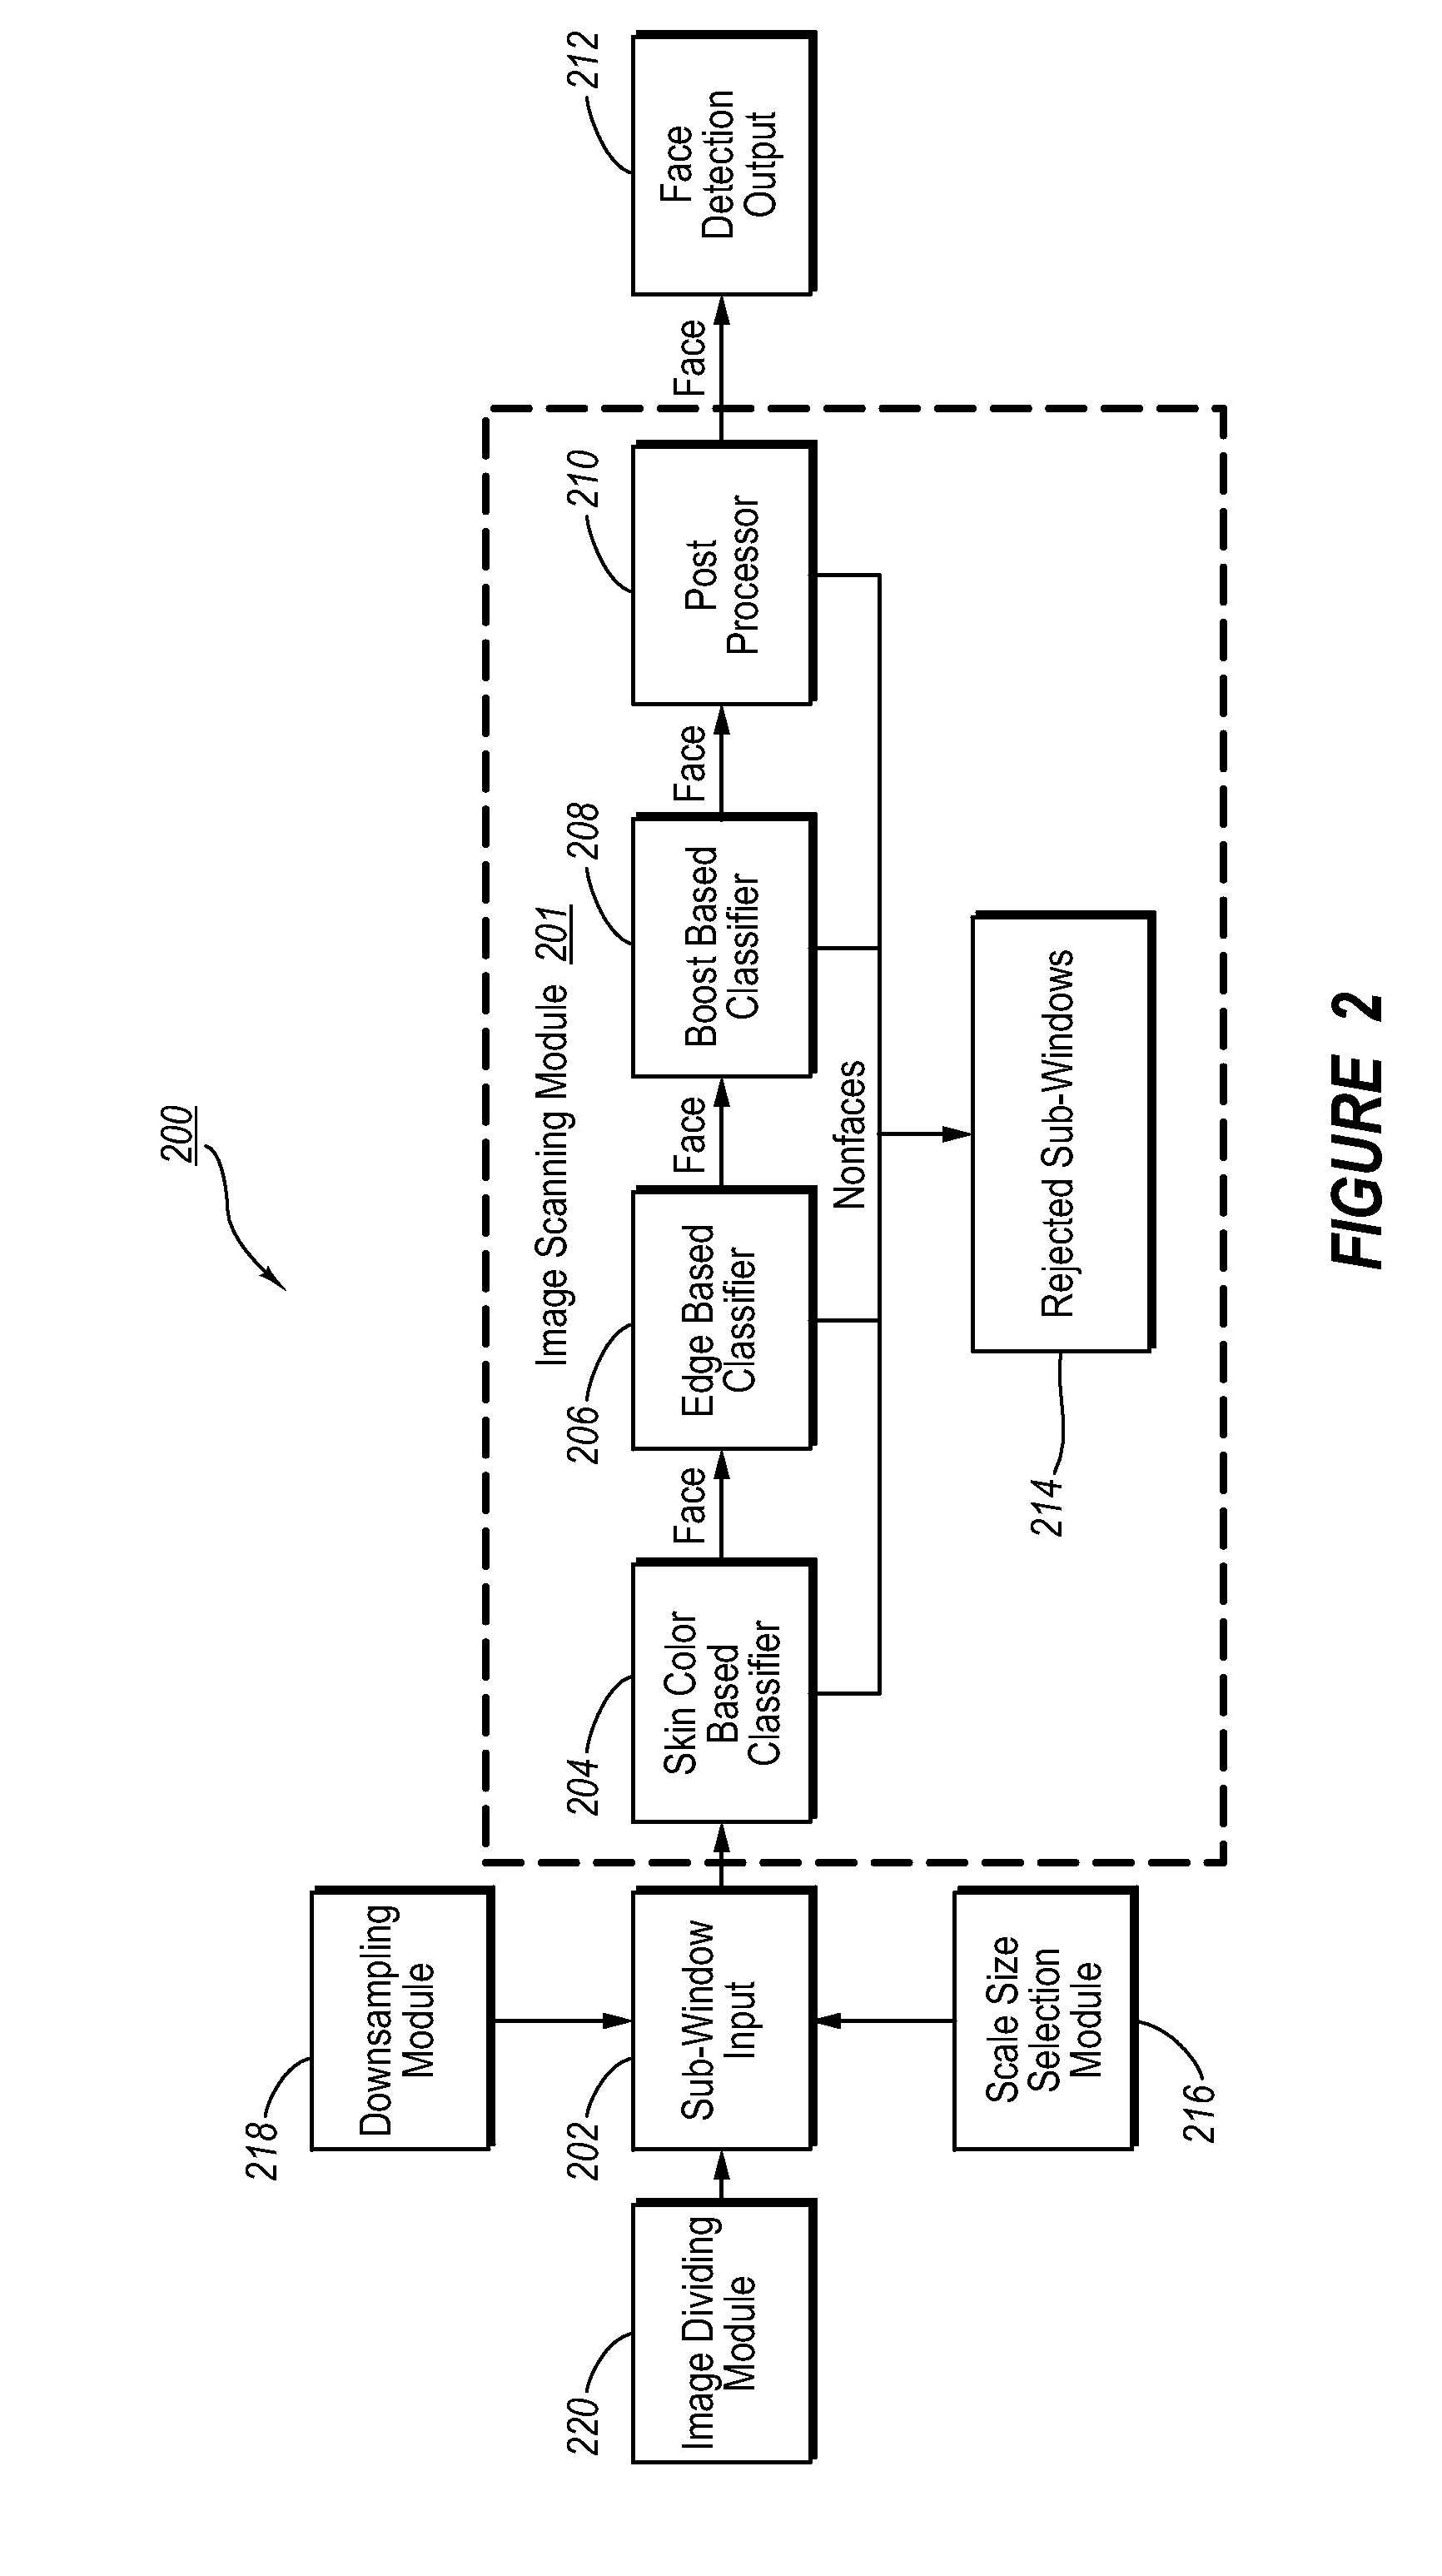 Two-Level Scanning For Memory Saving In Image Detection Systems